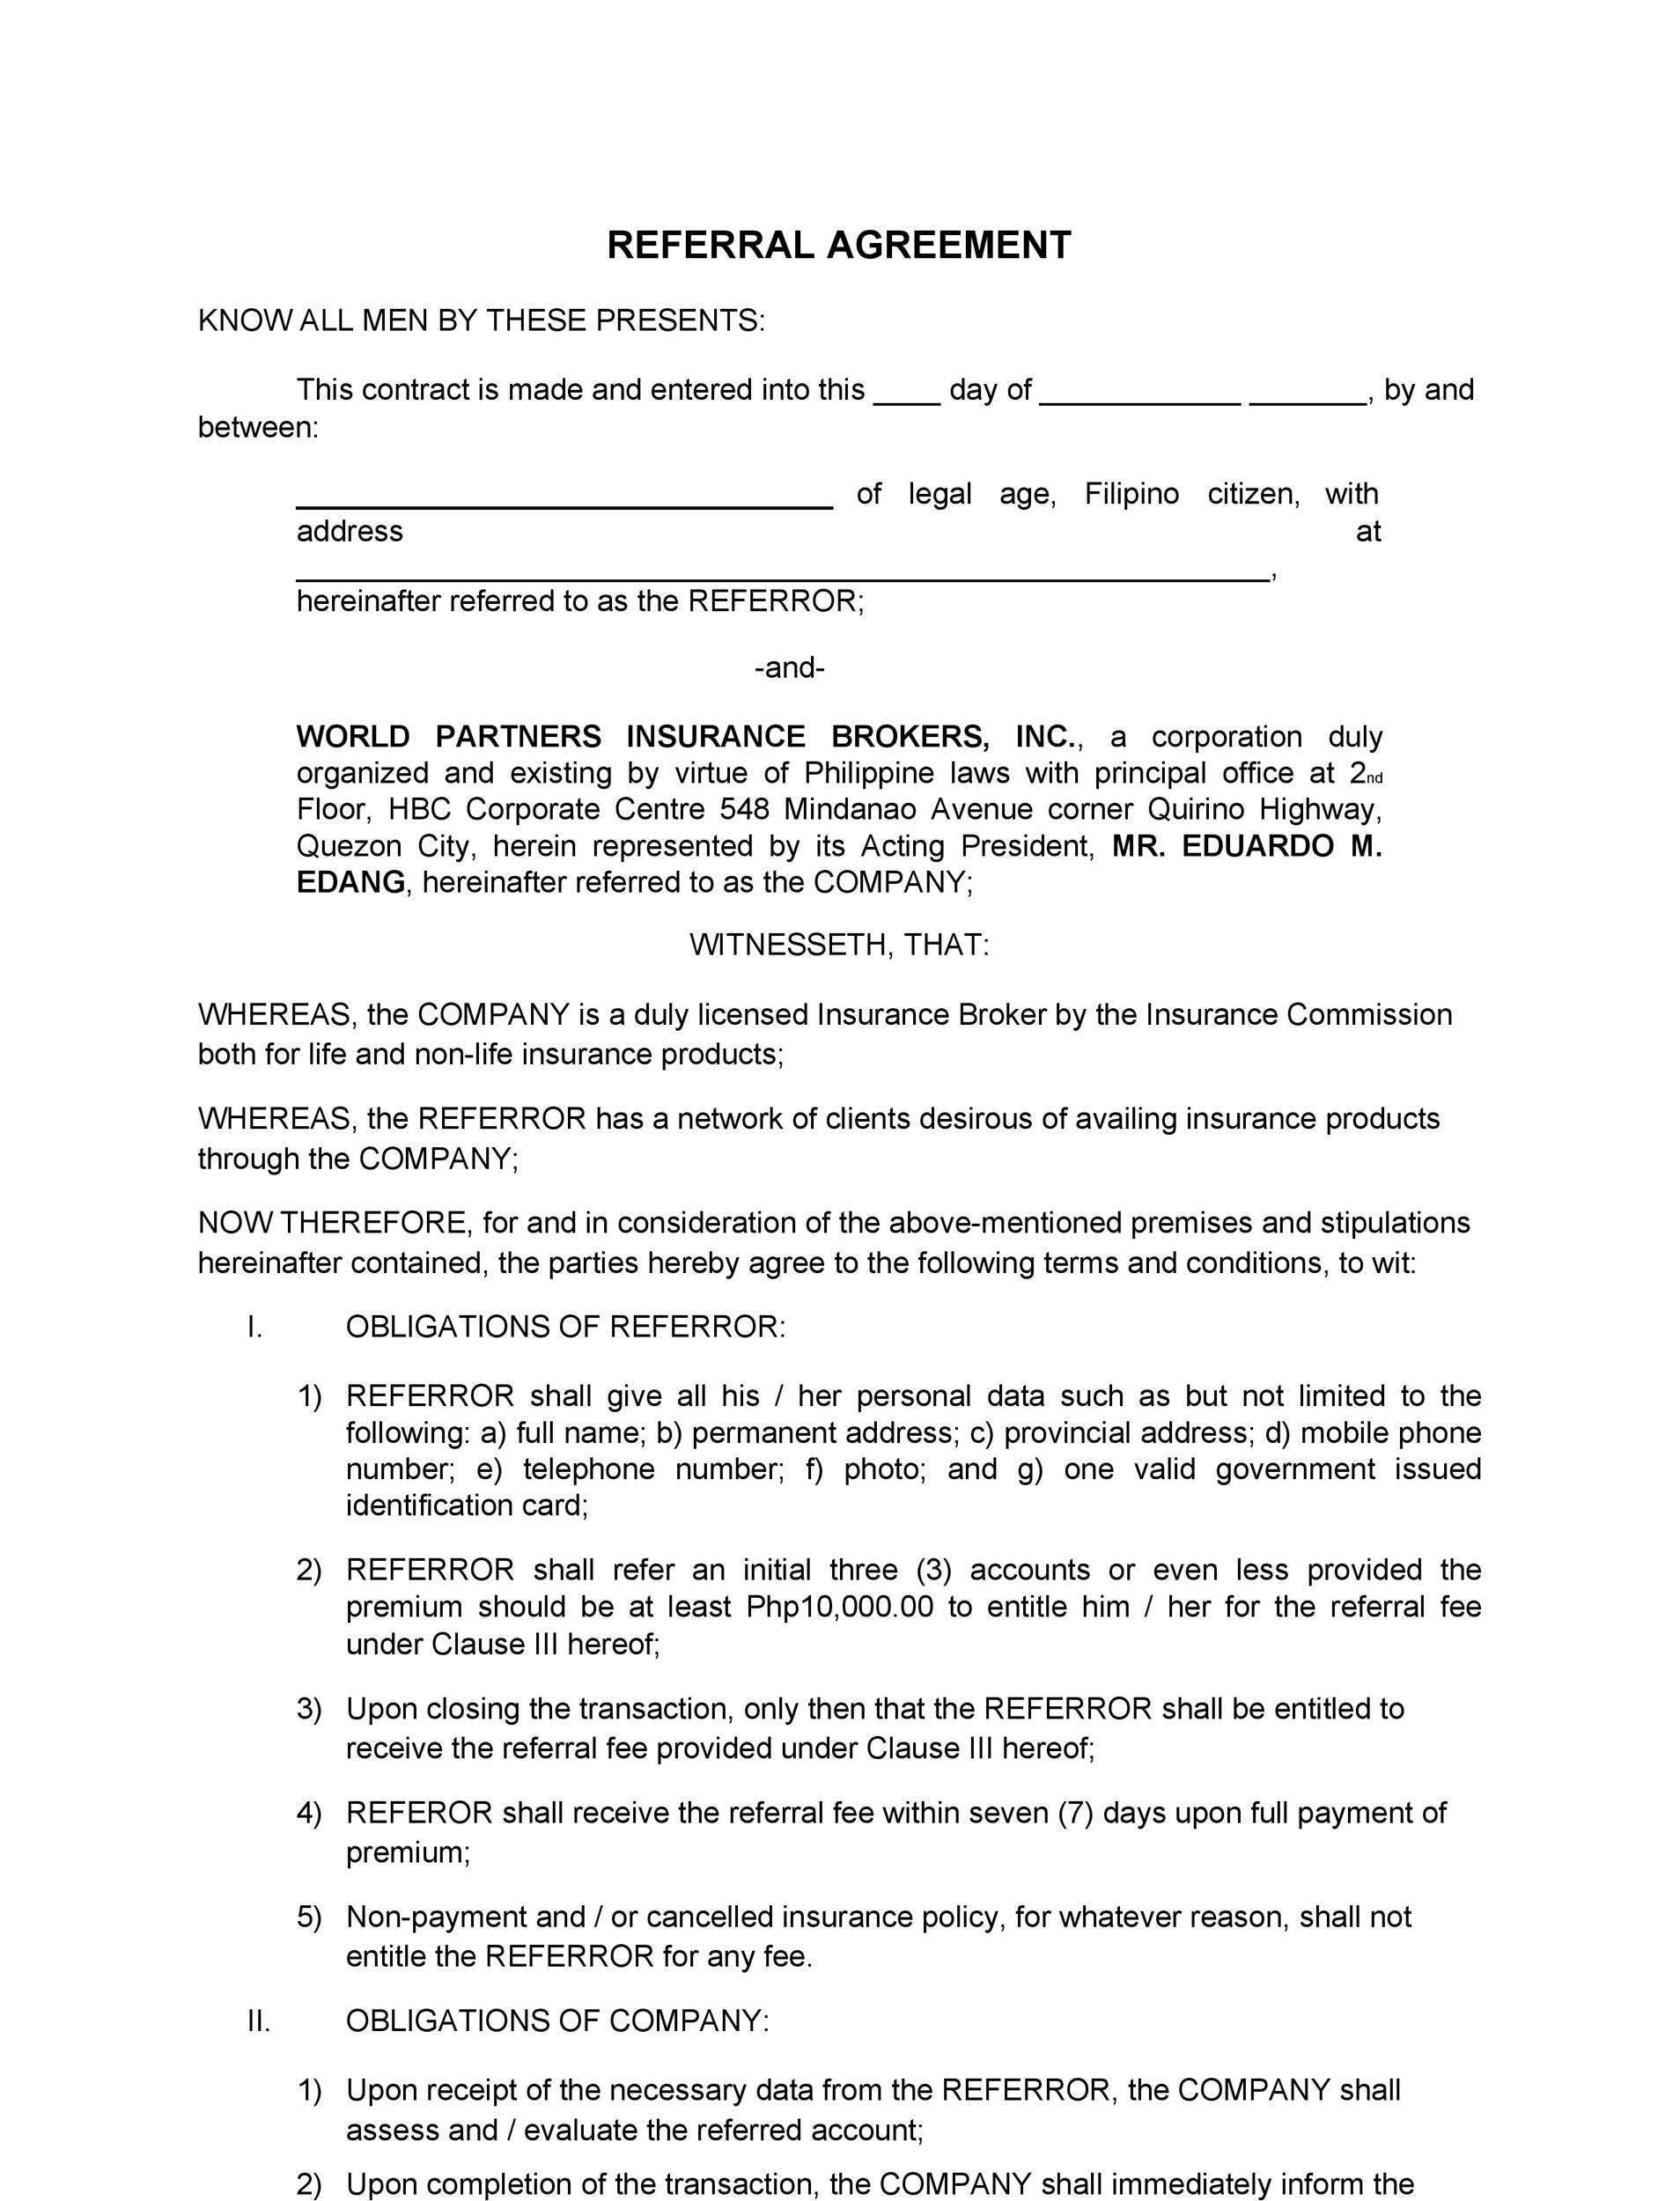 Free referral agreement template 48